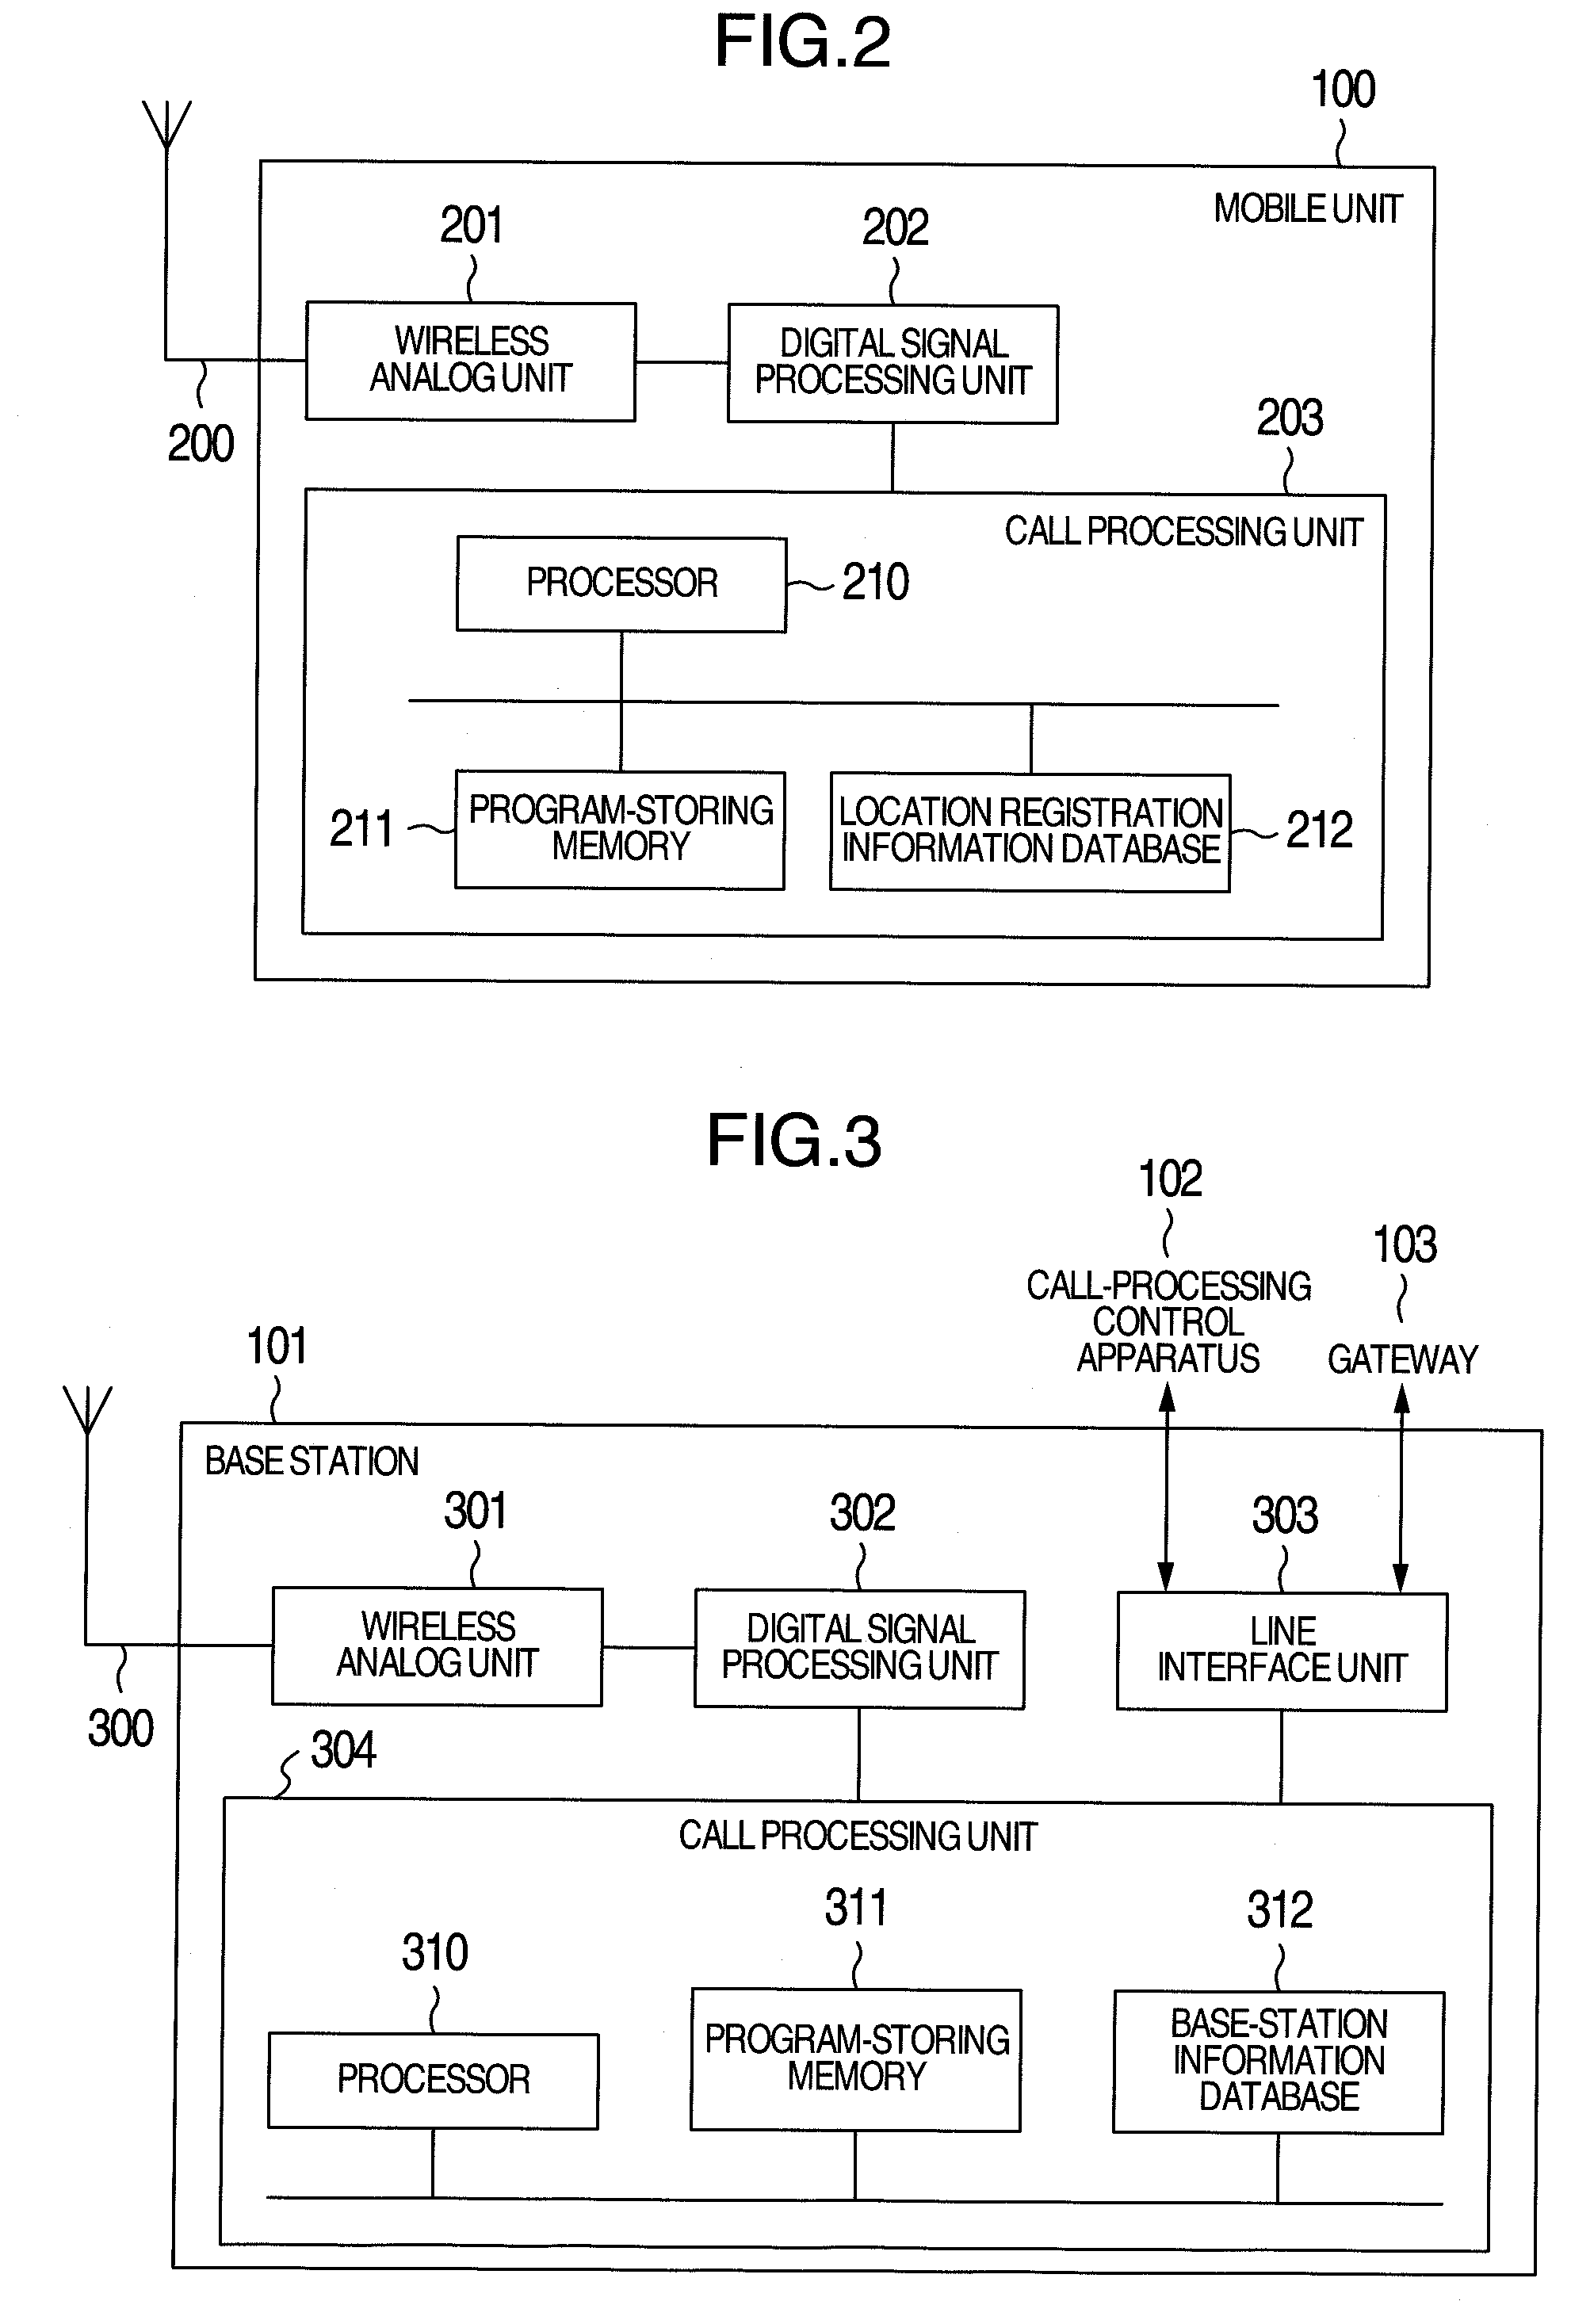 Paging-area determination method and call-processing control apparatus in mobile communication system